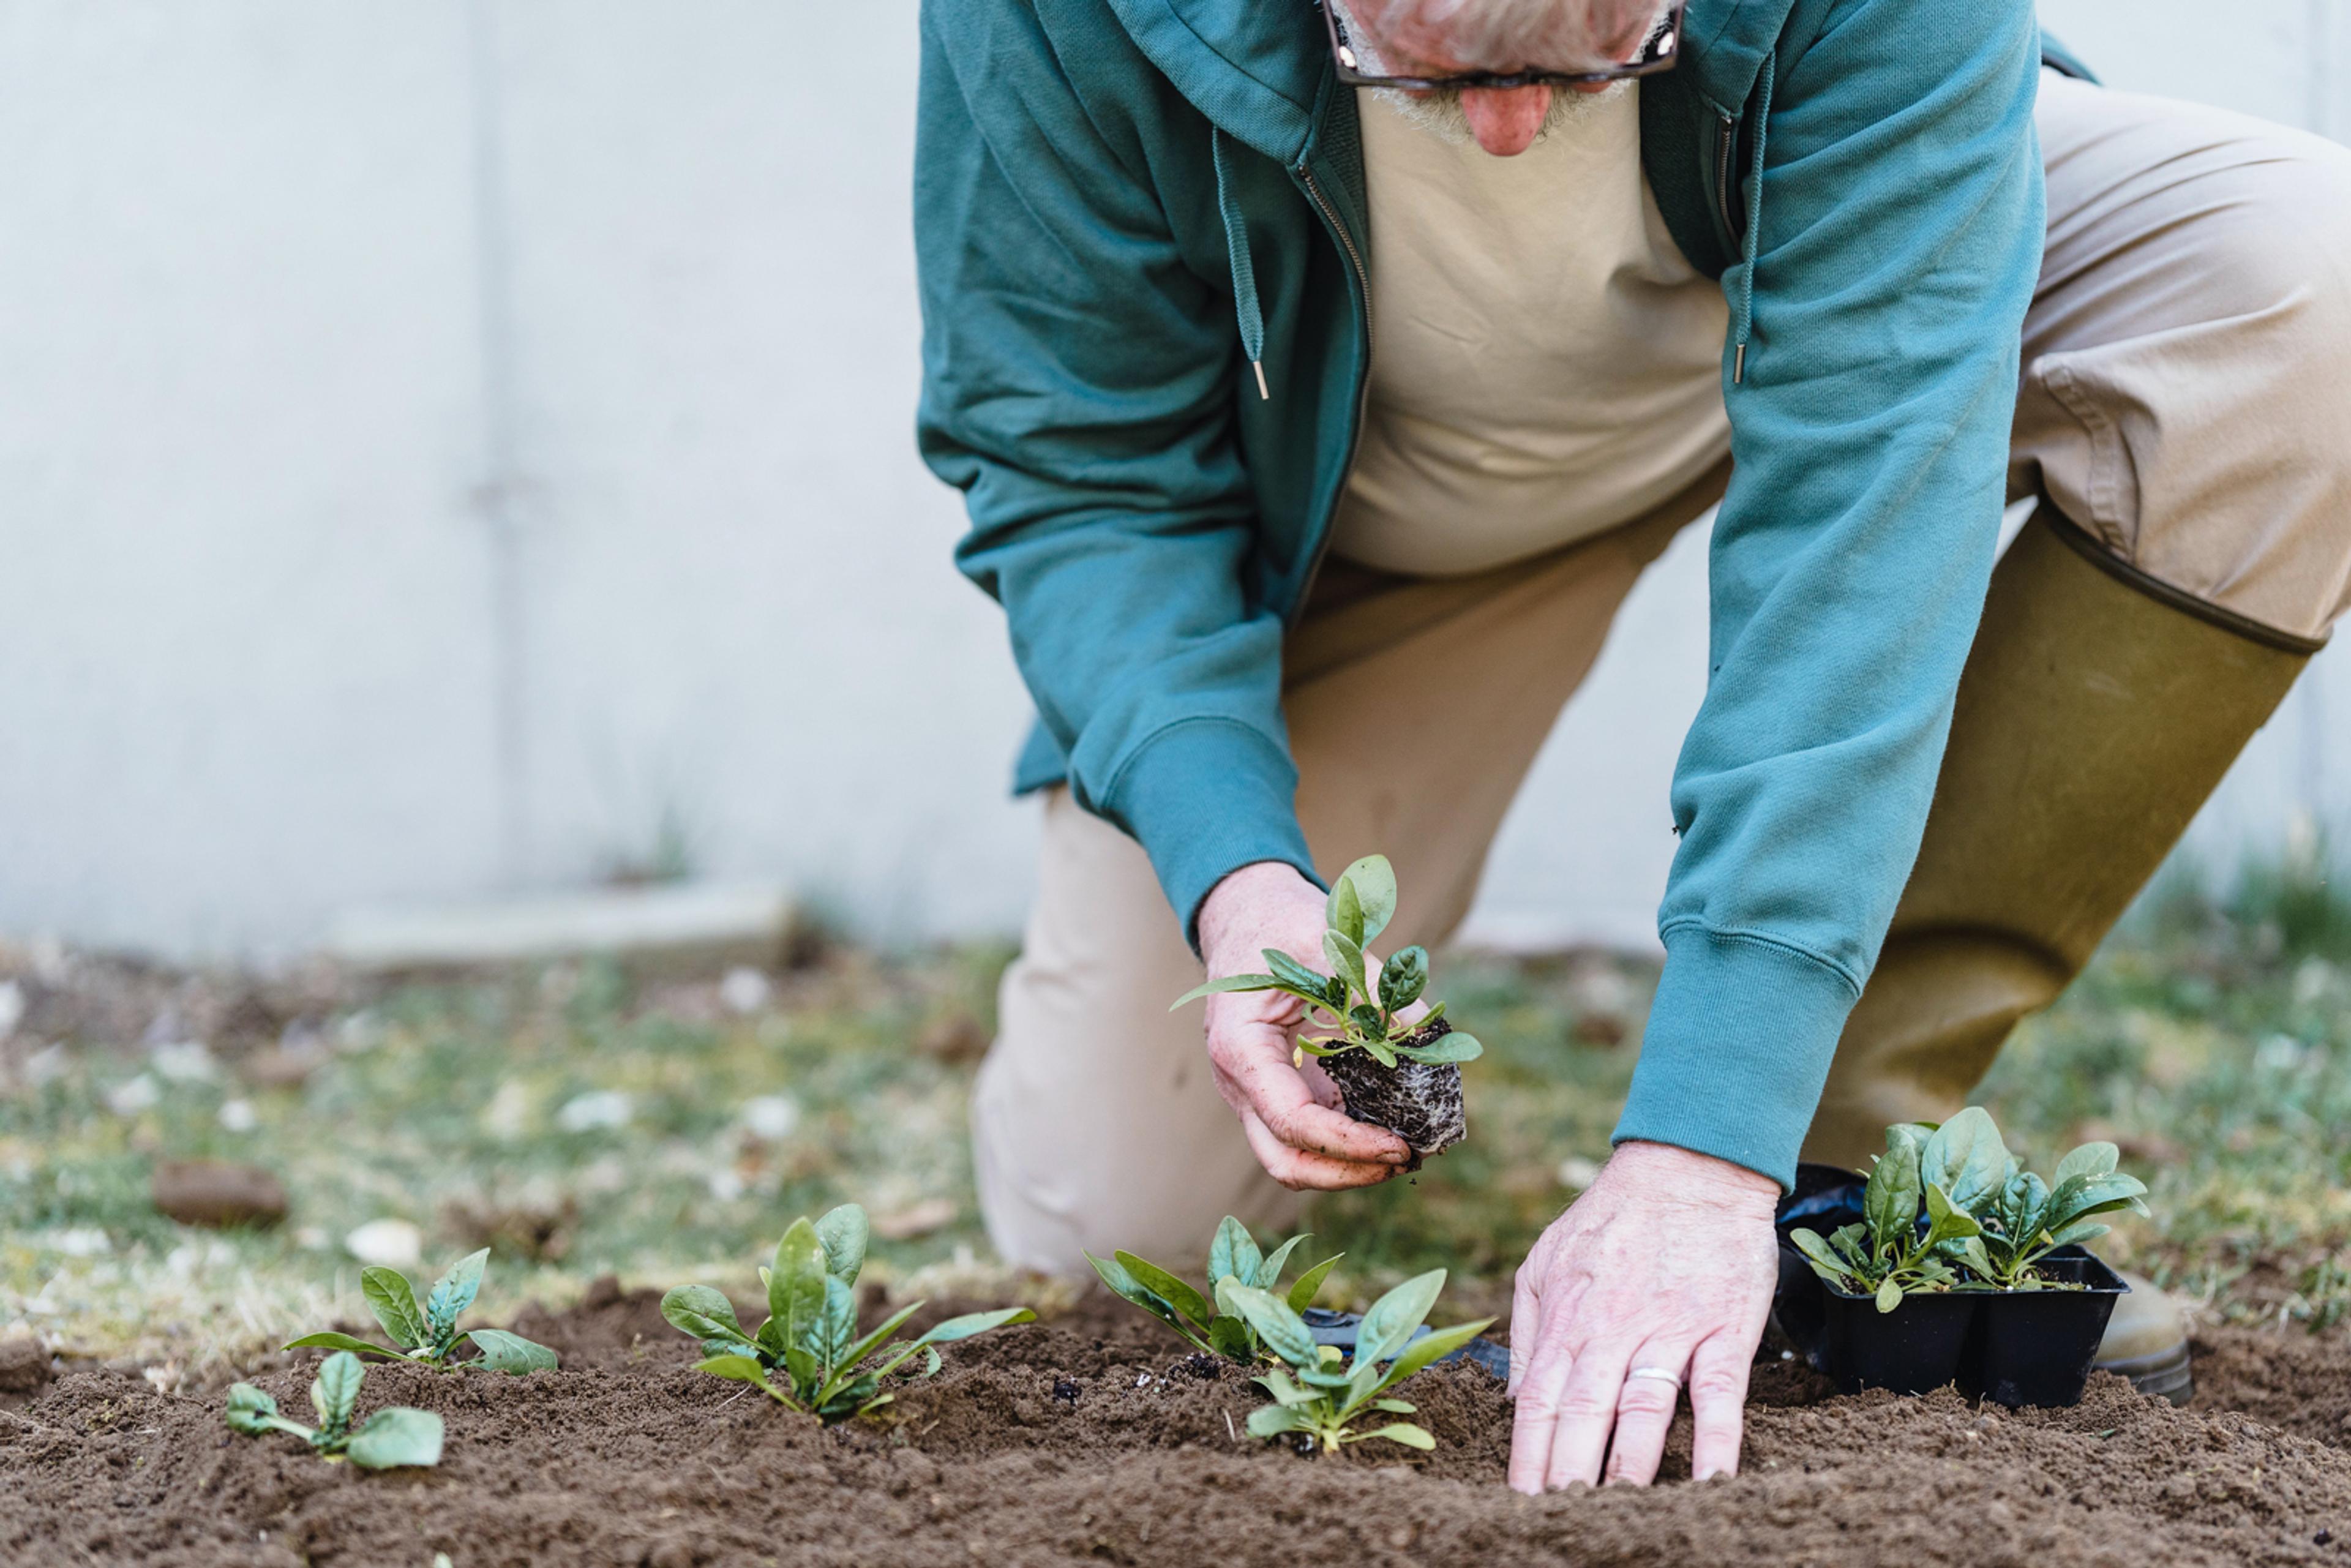 A person kneeling down and planting plants in the soil.